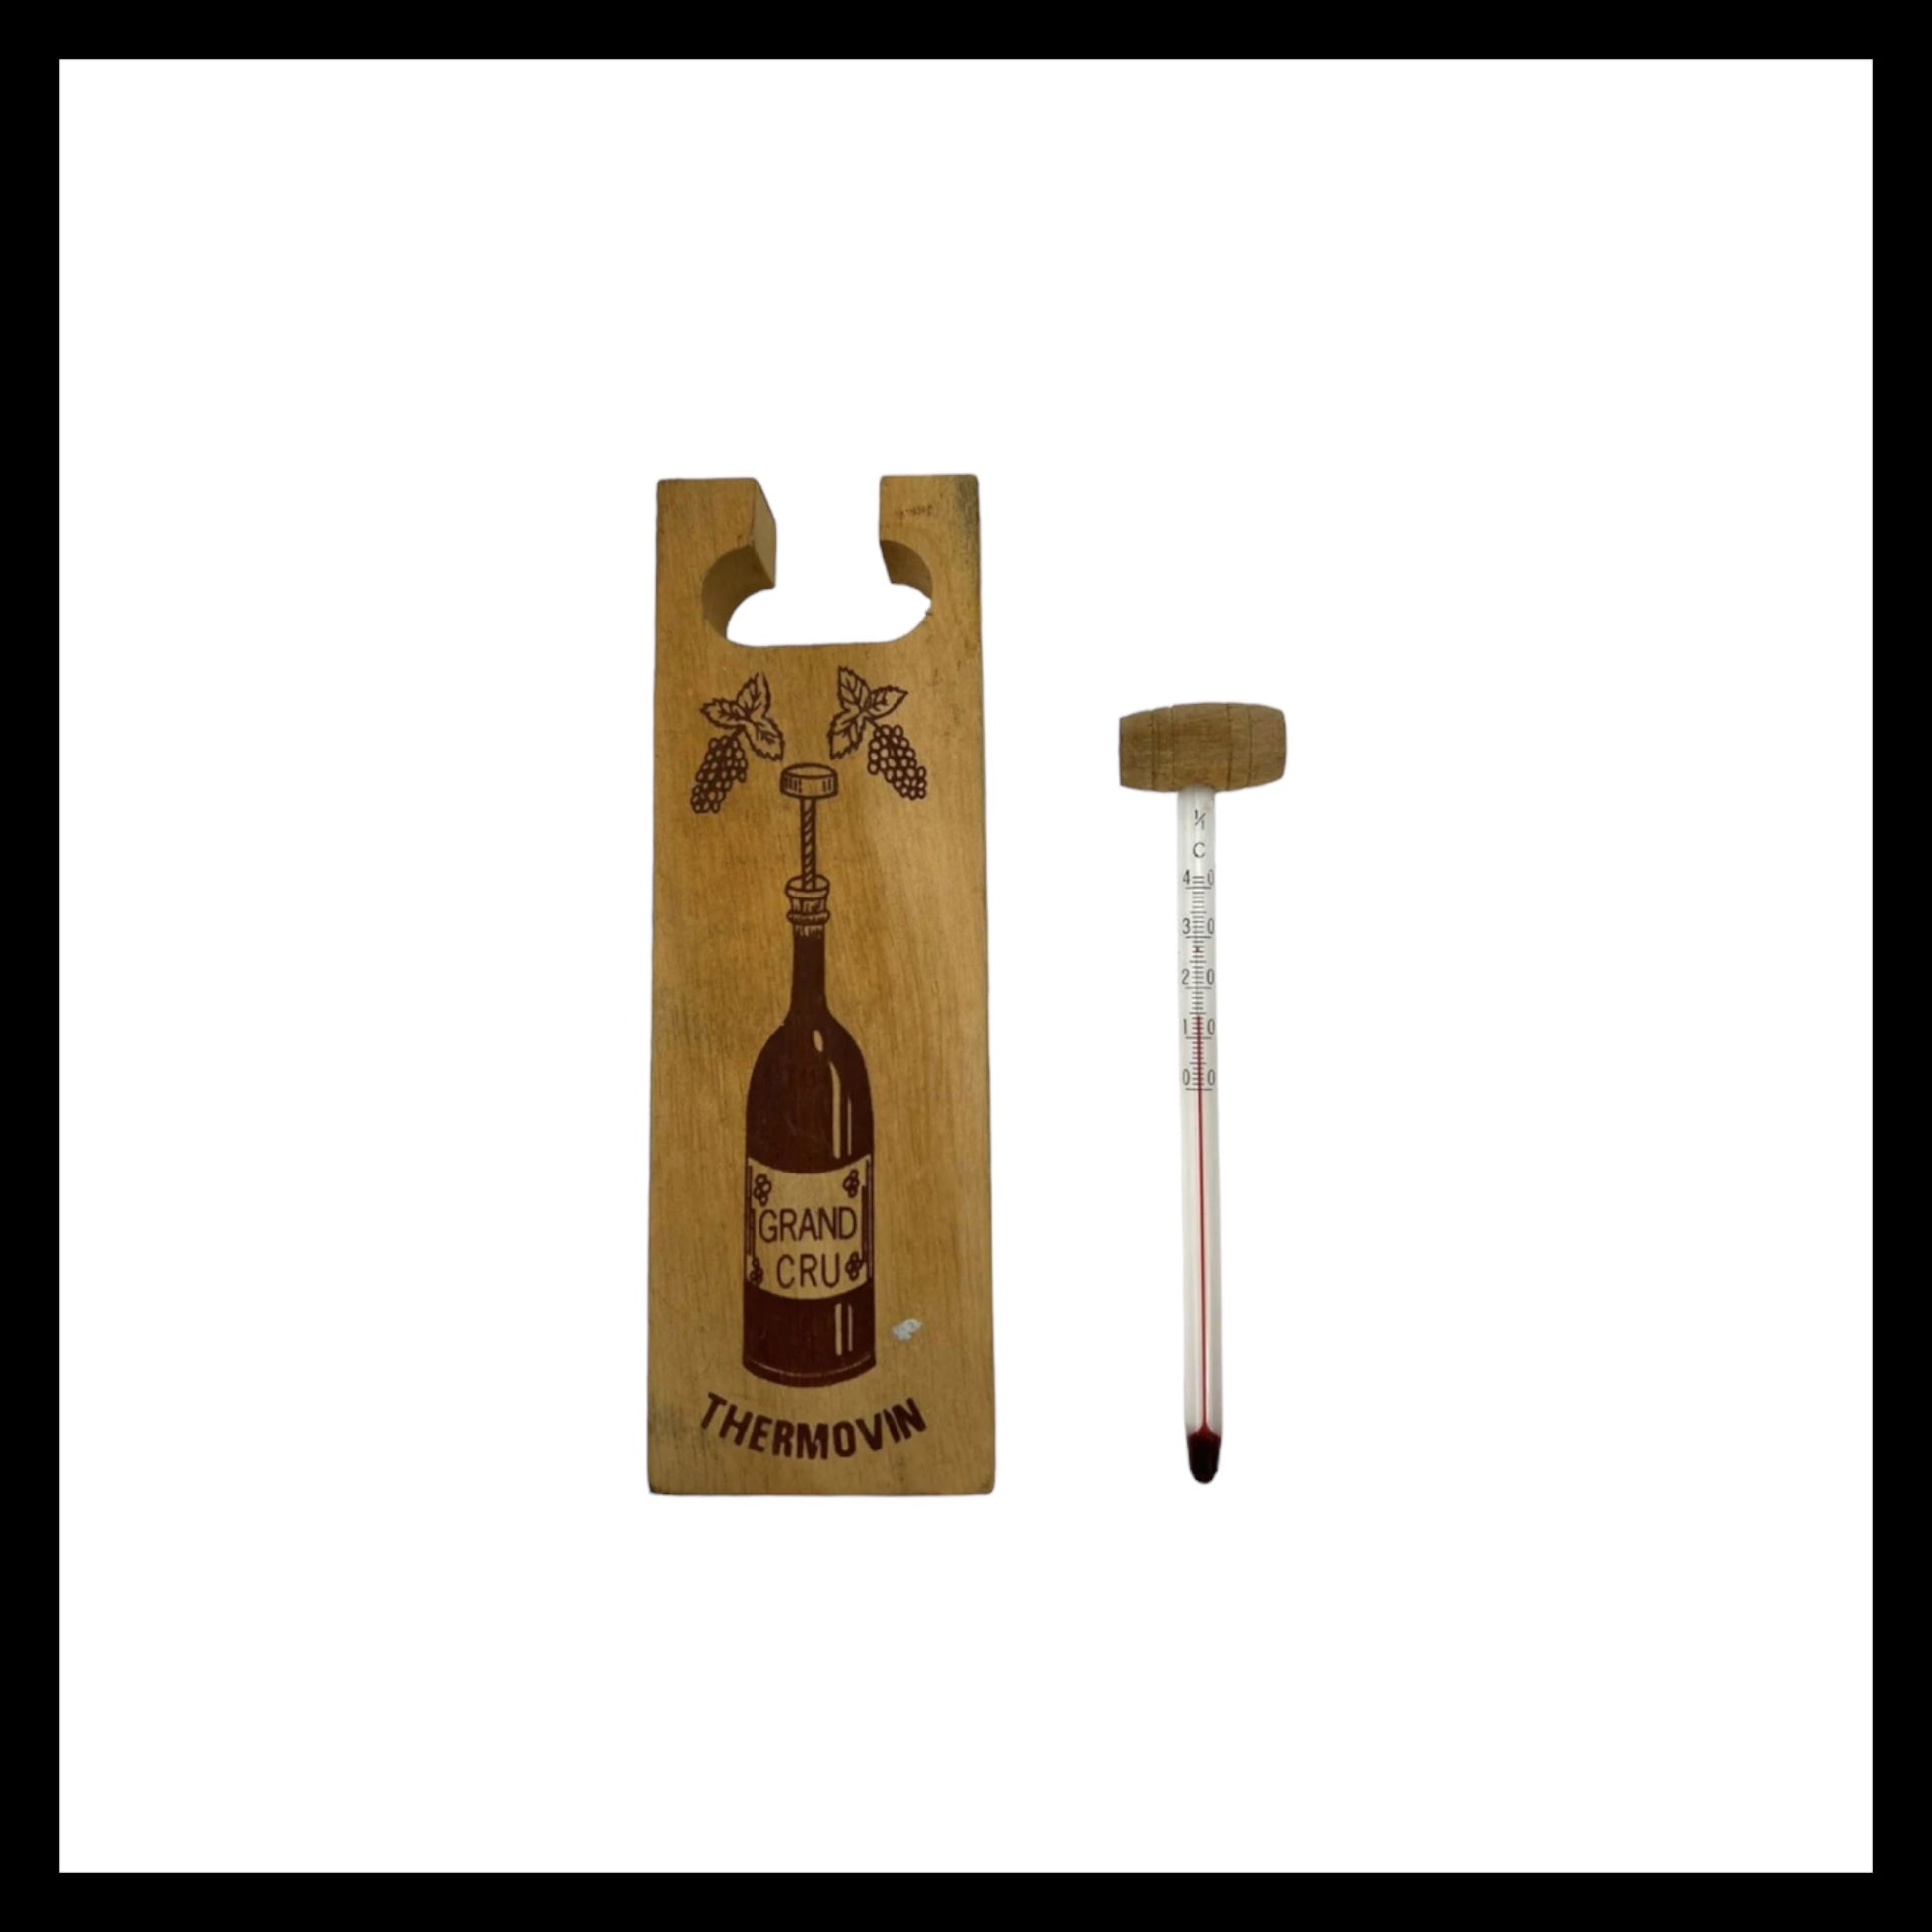 French vintage style wine thermometer sold by All Things French Store